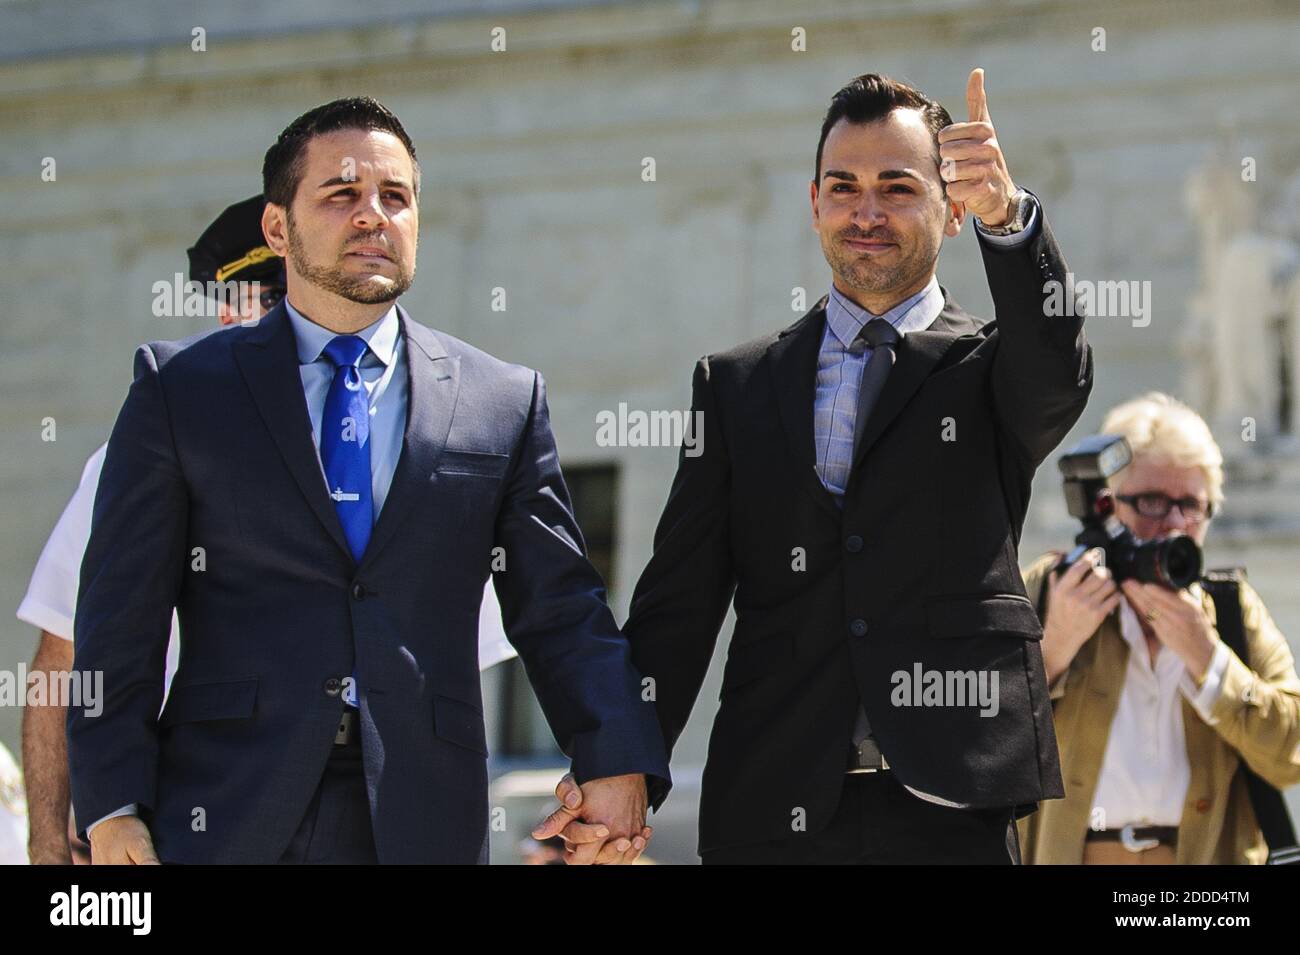 NO FILM, NO VIDEO, NO TV, NO DOCUMENTARY - Plaintiffs in the challenge to California's Proposition 8,Jeff Zarrillo and his partner Paul Katami, walk down the steps outside the U.S. Supreme Court on Wednesday, June 26, 2013. While the court struck down the Defense of Marriage Act, it chose not to rule on an appeal on Proposition 8 effectively undercutting the law. Photo by Pete Marovich/MCT/ABACAPRESS.COM Stock Photo